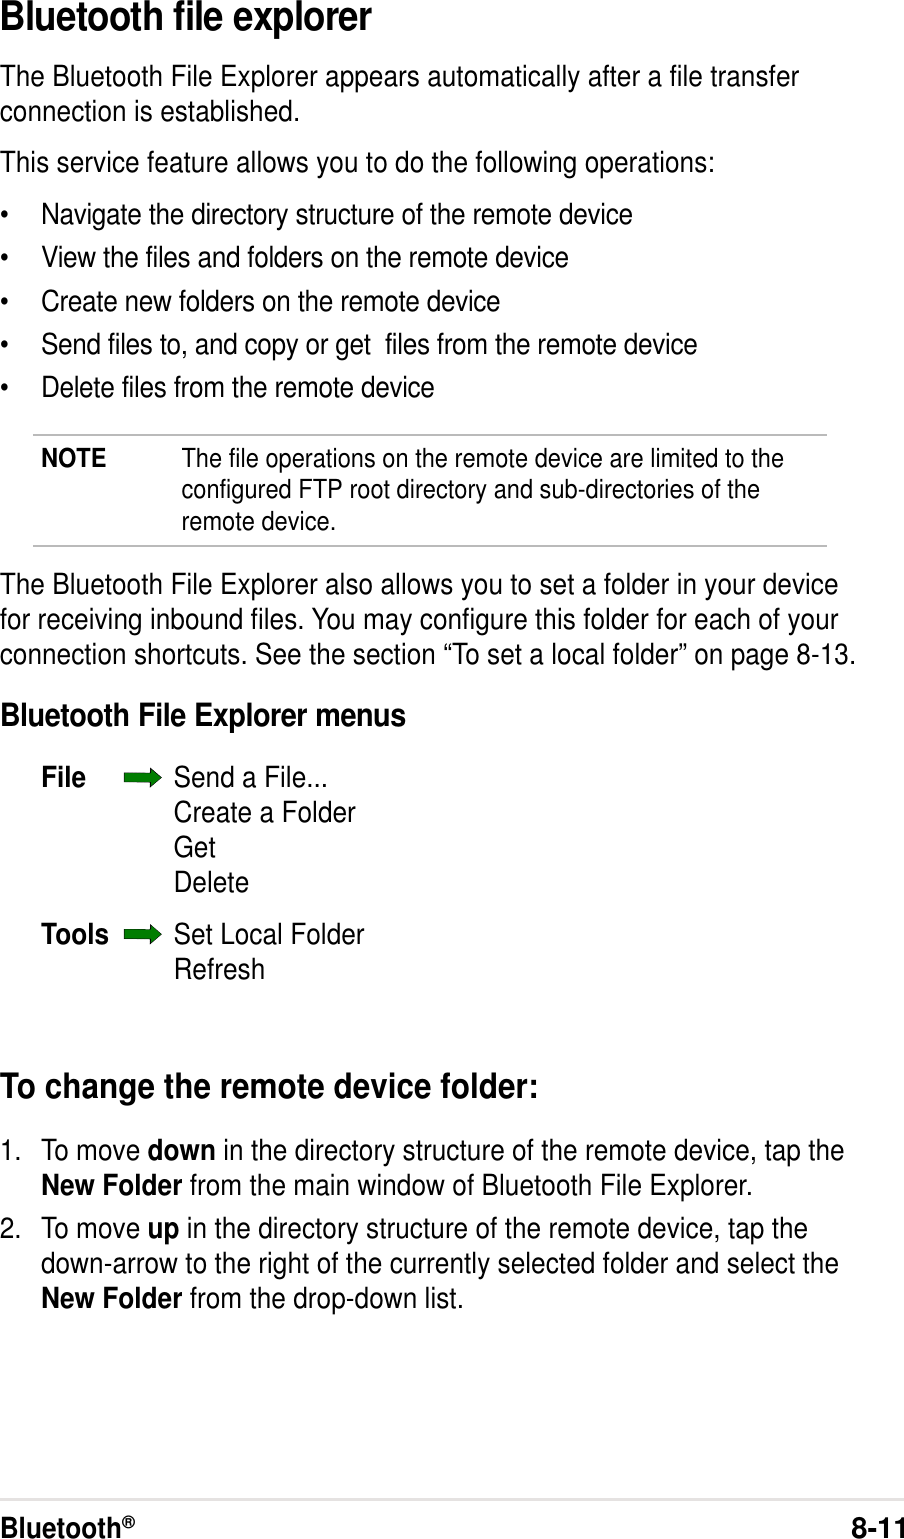 Bluetooth®8-11Bluetooth file explorerThe Bluetooth File Explorer appears automatically after a file transferconnection is established.This service feature allows you to do the following operations:•Navigate the directory structure of the remote device•View the files and folders on the remote device•Create new folders on the remote device•Send files to, and copy or get  files from the remote device•Delete files from the remote deviceNOTE The file operations on the remote device are limited to theconfigured FTP root directory and sub-directories of theremote device.The Bluetooth File Explorer also allows you to set a folder in your devicefor receiving inbound files. You may configure this folder for each of yourconnection shortcuts. See the section “To set a local folder” on page 8-13.Bluetooth File Explorer menusFile Send a File...Create a FolderGetDeleteTools Set Local FolderRefreshTo change the remote device folder:1. To move down in the directory structure of the remote device, tap theNew Folder from the main window of Bluetooth File Explorer.2. To move up in the directory structure of the remote device, tap thedown-arrow to the right of the currently selected folder and select theNew Folder from the drop-down list.